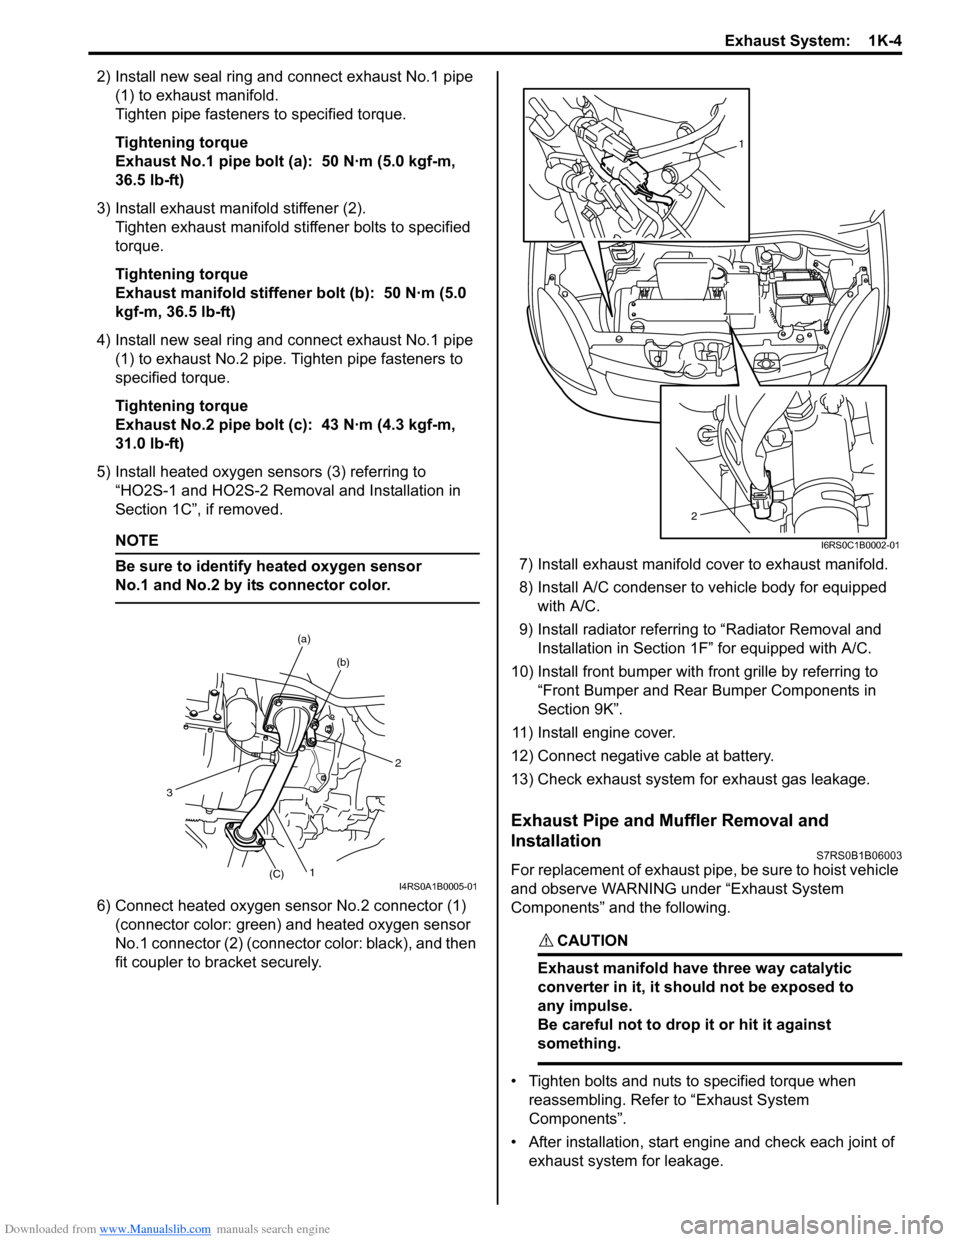 SUZUKI SWIFT 2006 2.G Service User Guide Downloaded from www.Manualslib.com manuals search engine Exhaust System:  1K-4
2) Install new seal ring and connect exhaust No.1 pipe (1) to exhaust manifold.
Tighten pipe fasteners to specified torqu